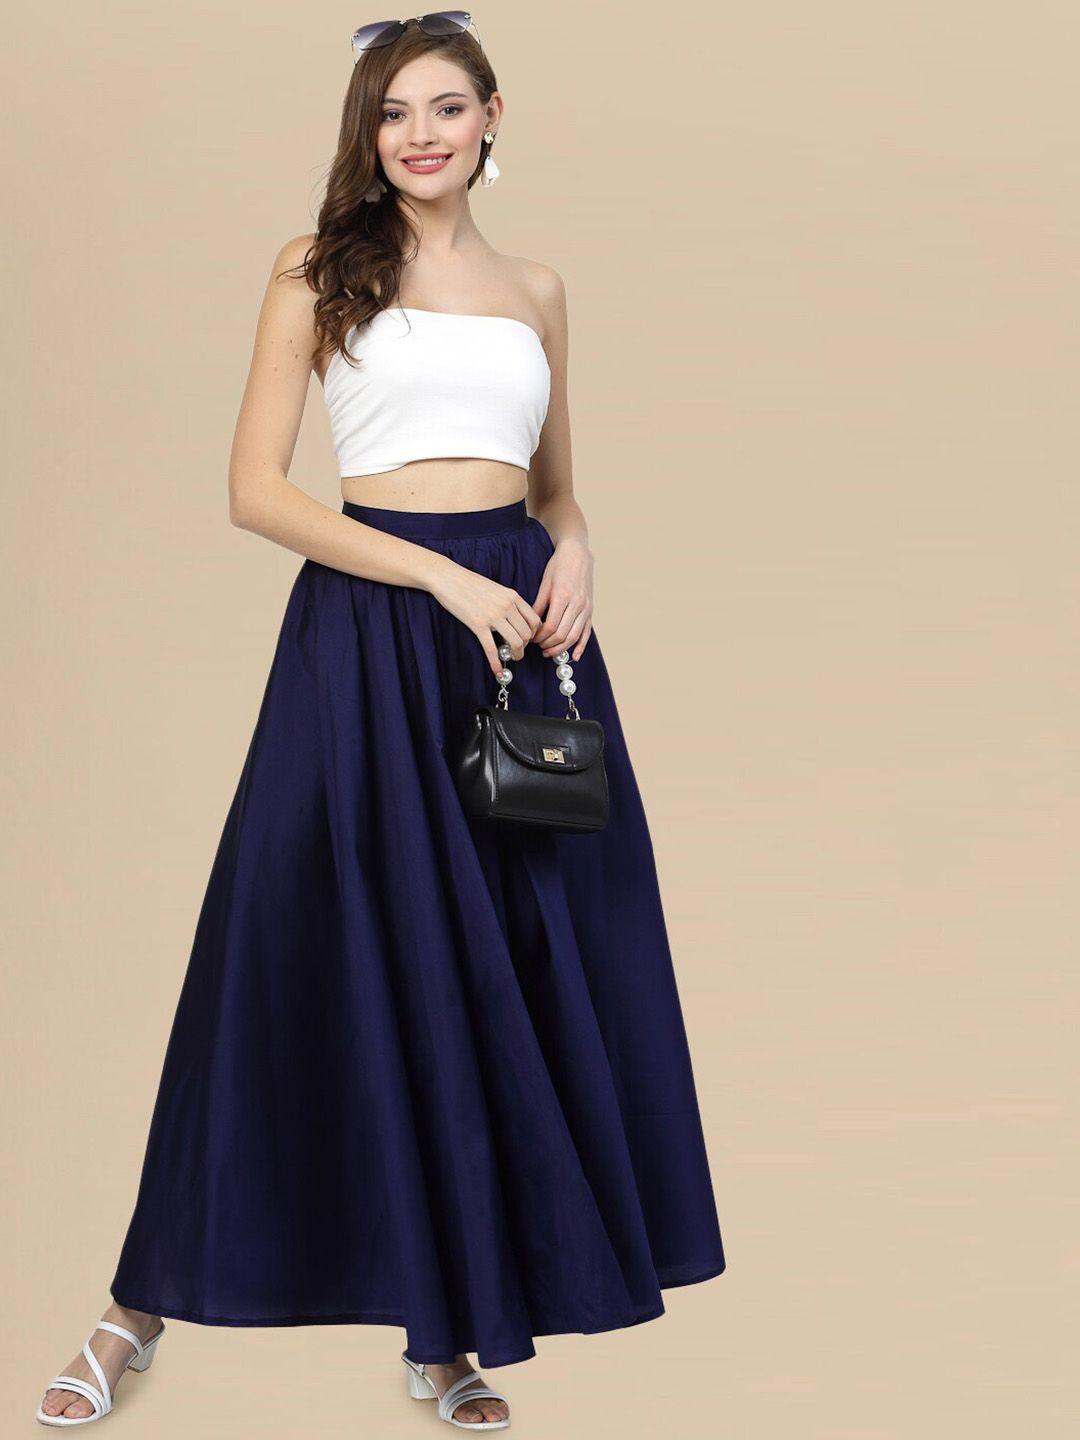 dressberry gathered detail maxi length flared skirt